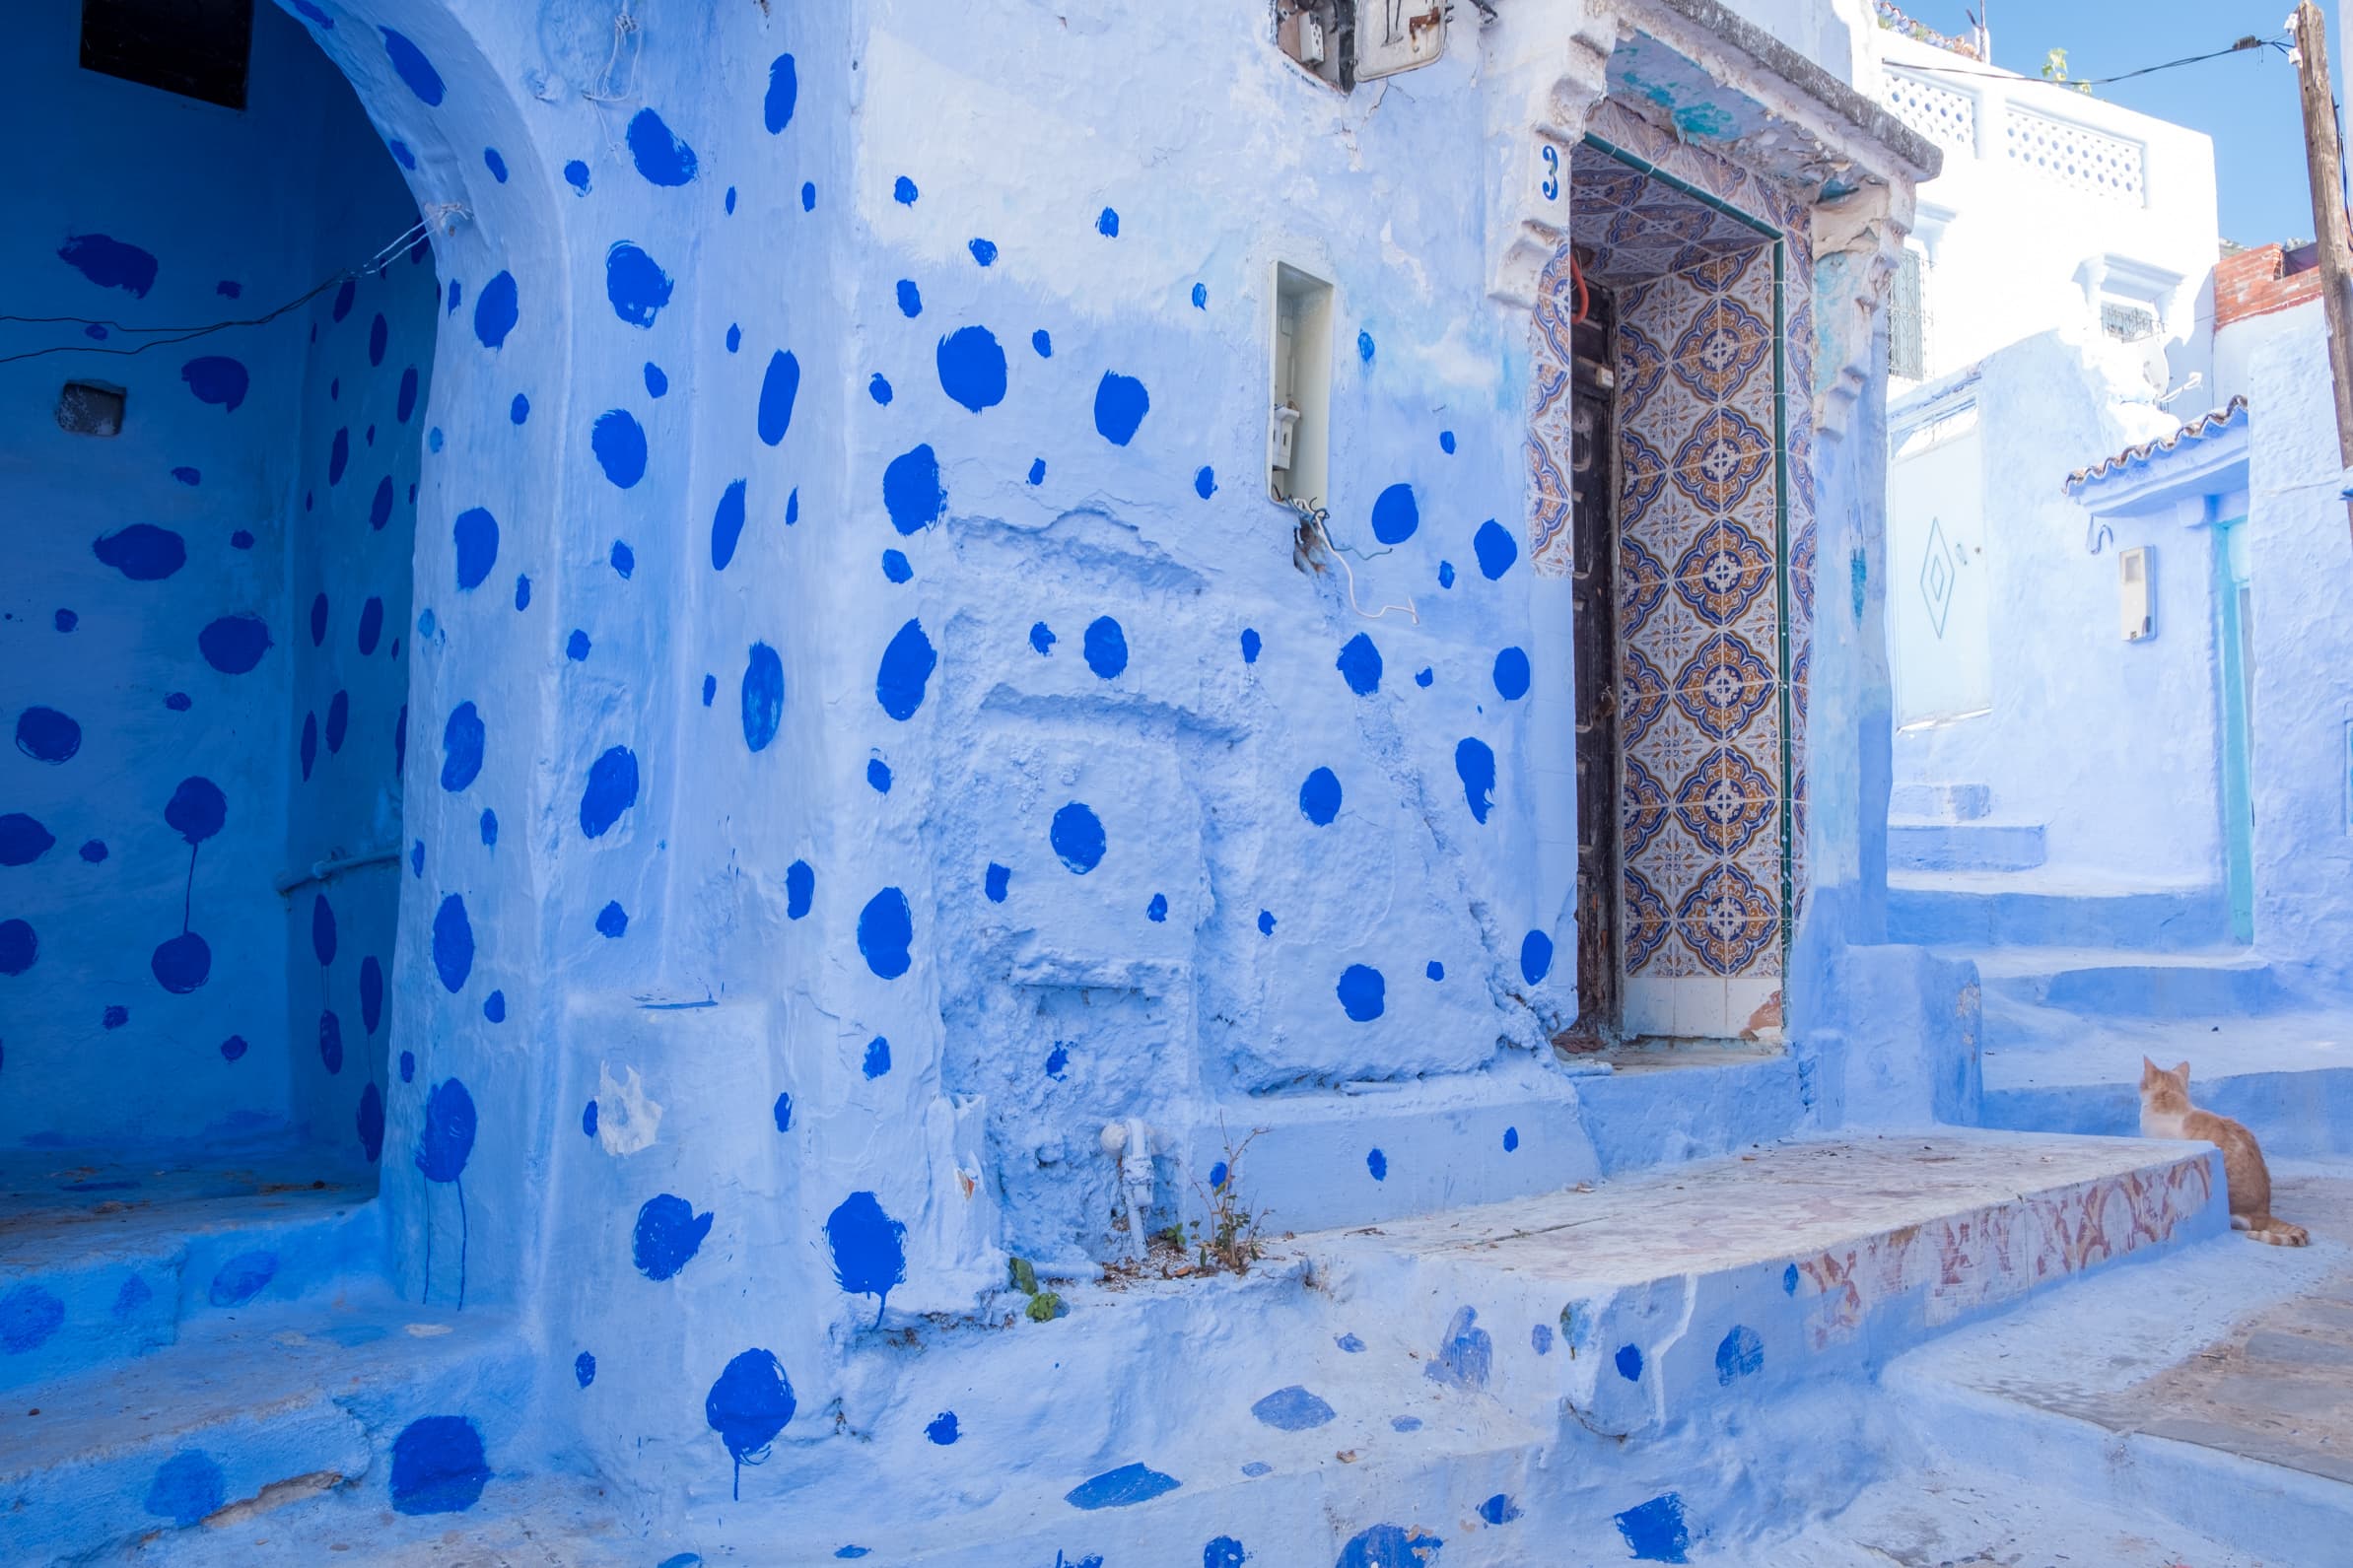 A beautiful polka dot street with cat in Chefchaouen, Morocco